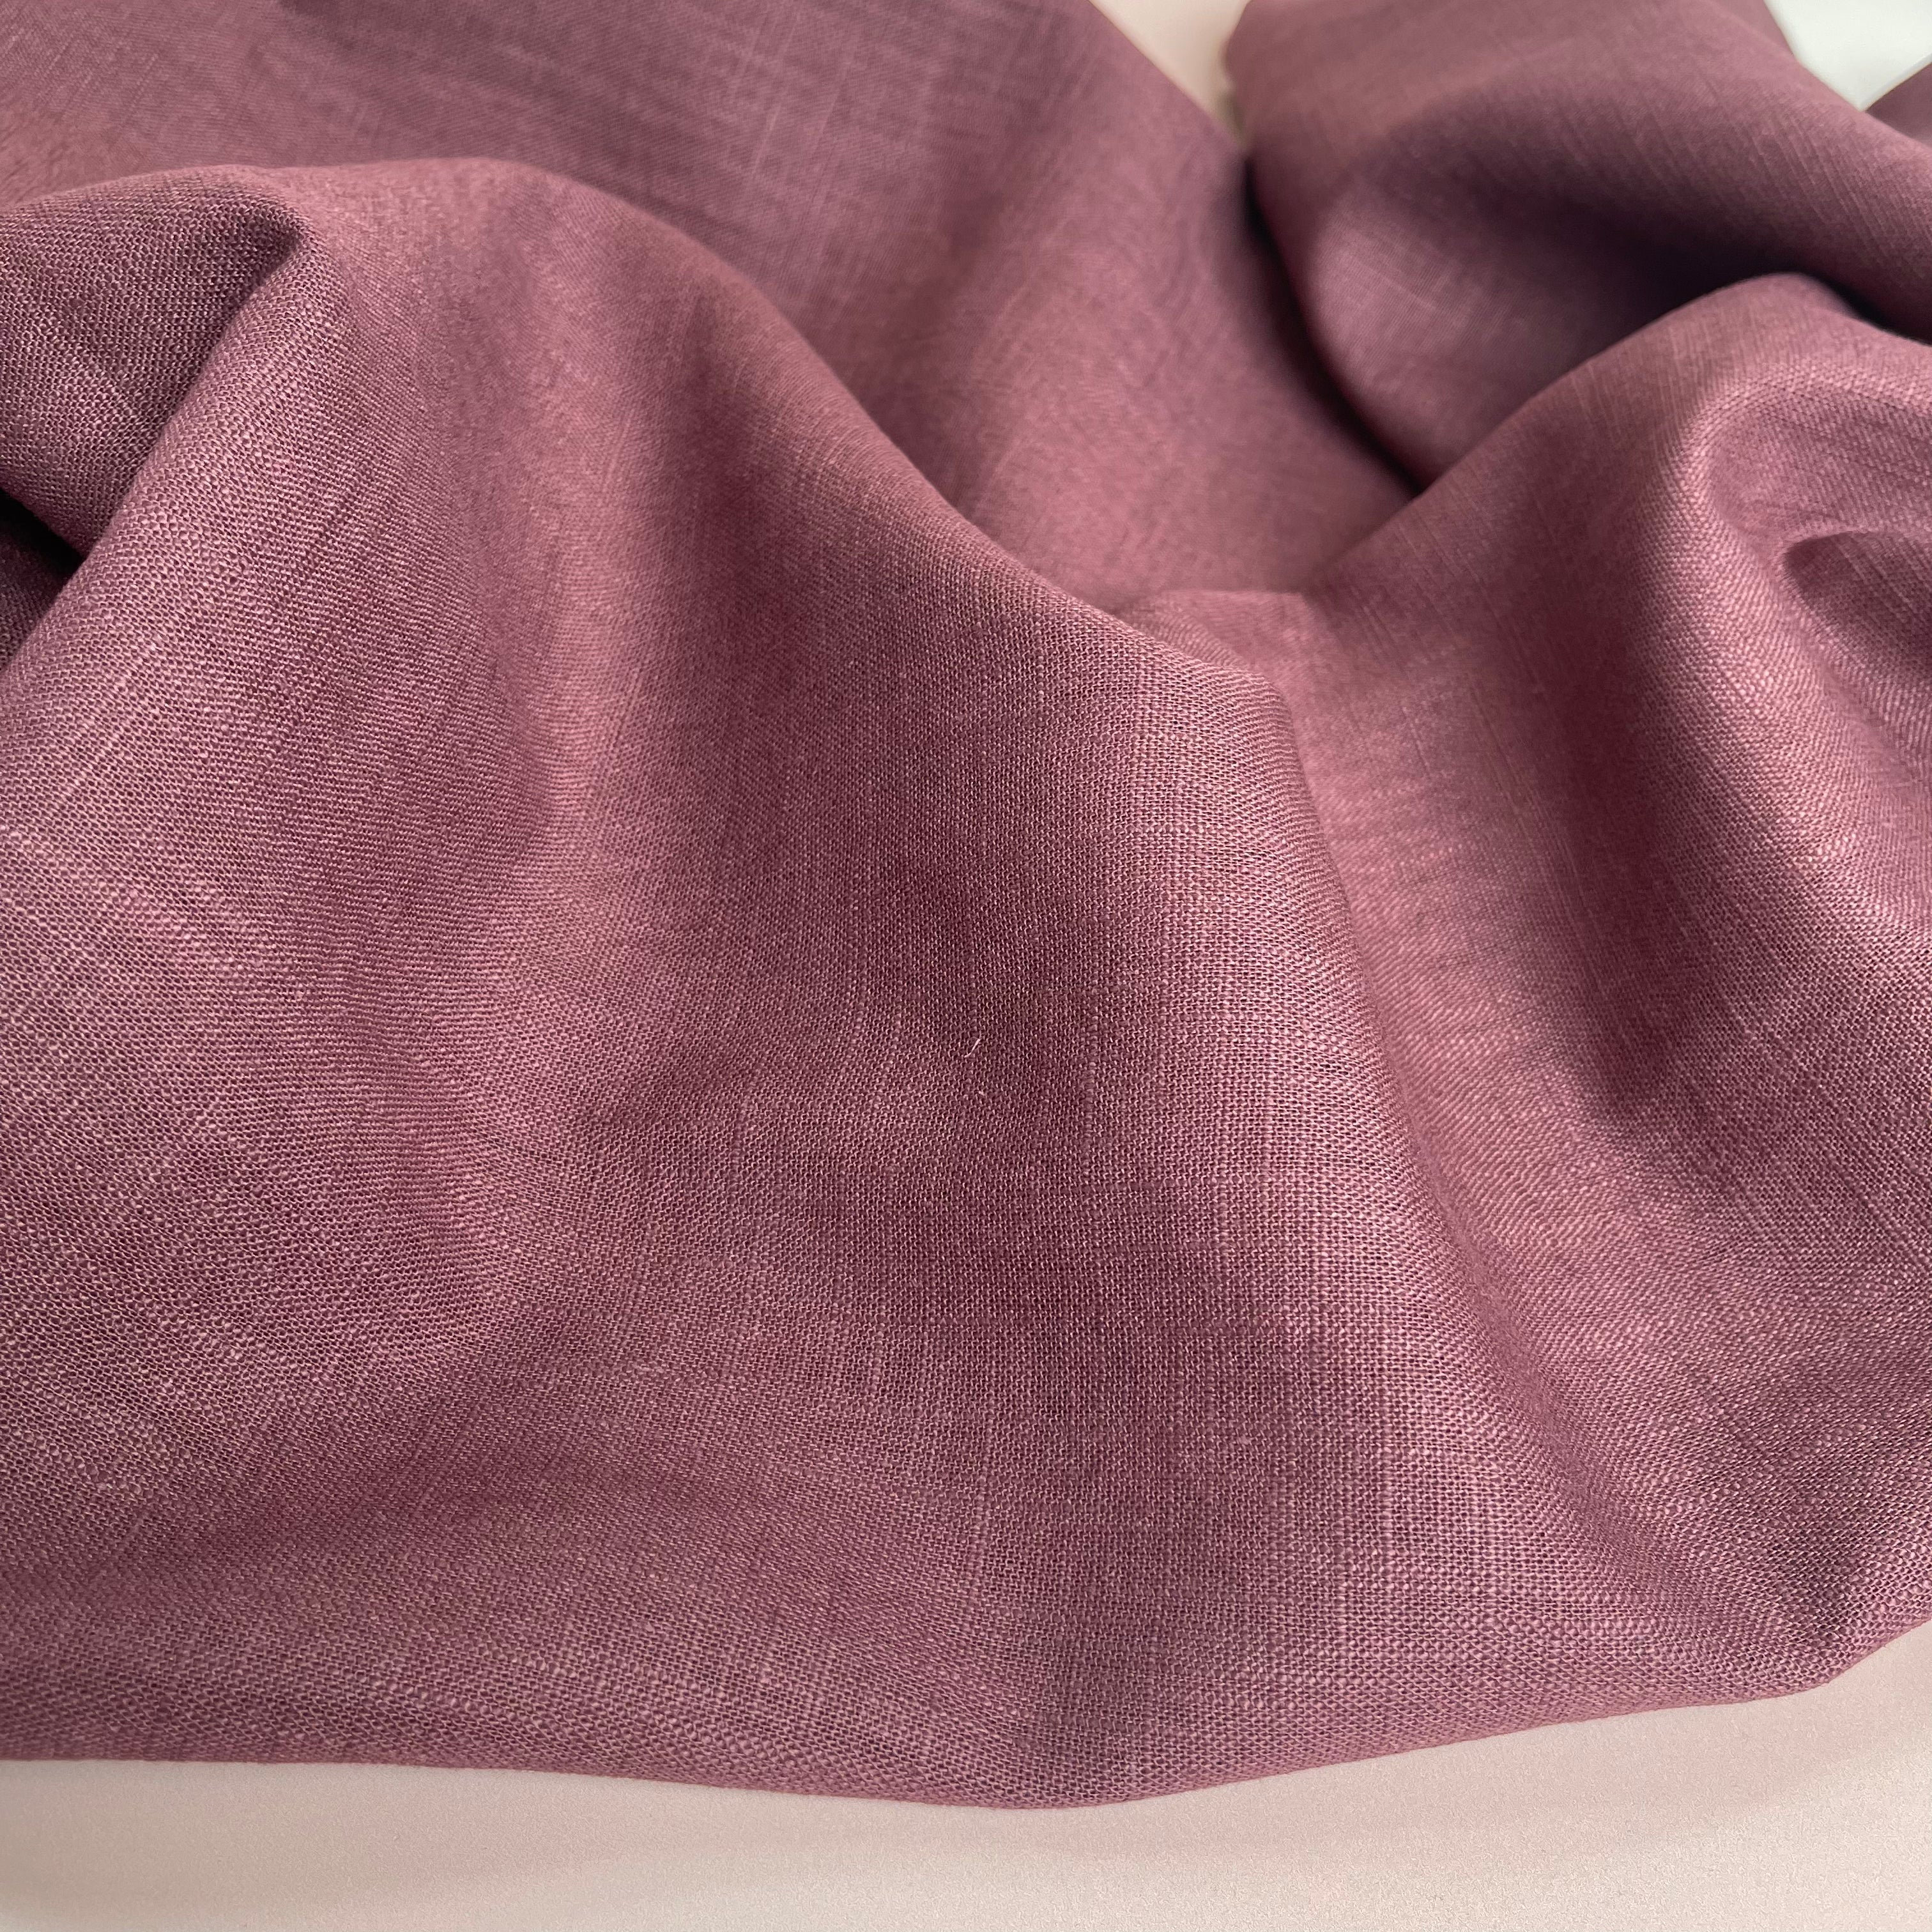 REMNANT 0.25 Metres (plus extra 4cm with fault) Breeze Cream Aubergine - Enzyme Washed Pure Linen Fabric